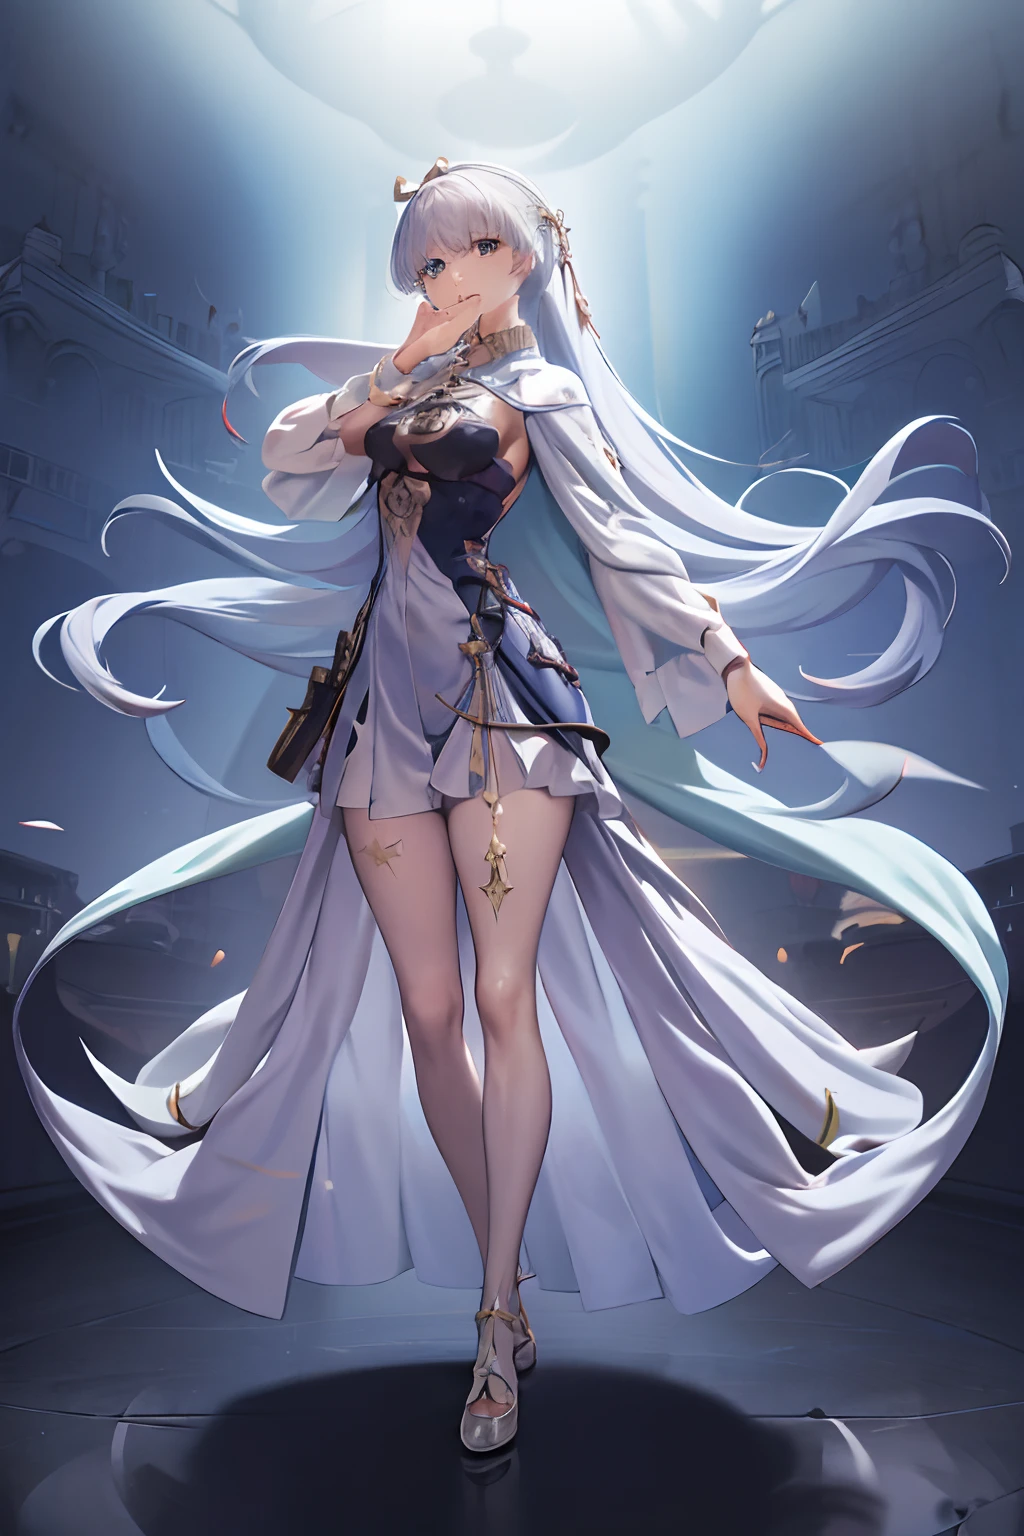 1 masterpiece, extremely detailed, 1 girl, just a girl, inspired by the body and face of Anastasia from the anime FGO, and the hair of Kamisato Ayaka, perfect combination of characteristics, blue eyes, long brown hair, medium breasts, foot, dynamic pose, short revealing dress, sexy dress, shoe with heels, tight thigh stockings, wide thighs, full body, perfect anatomy, beautiful, girl of extreme beauty